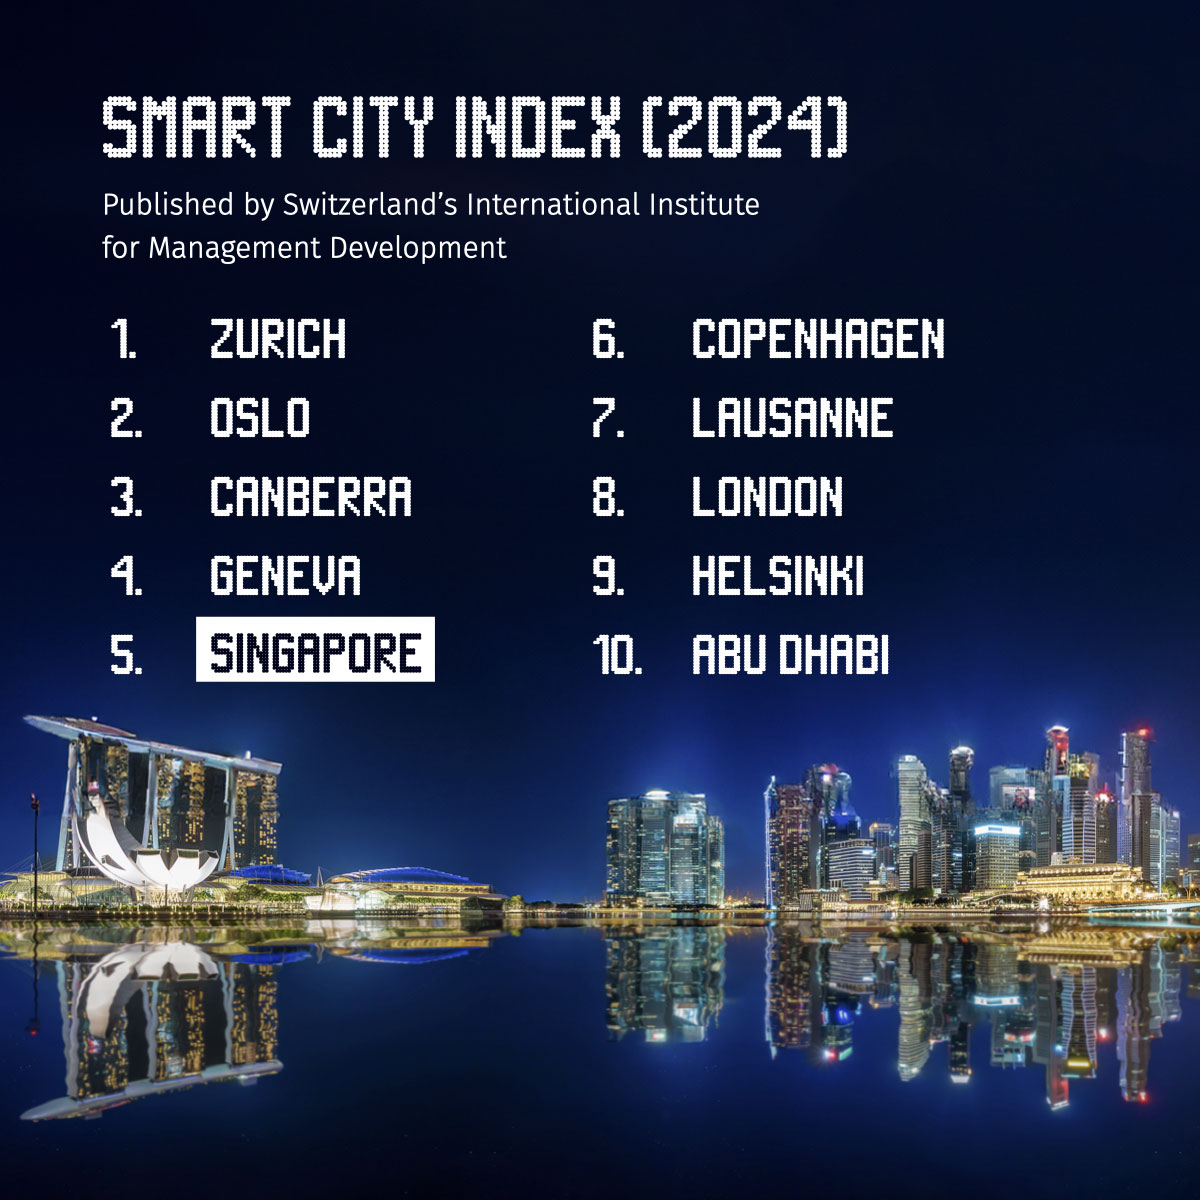 IMD Smart City Index 2024 (Singapore is placed 5th in the ranking)